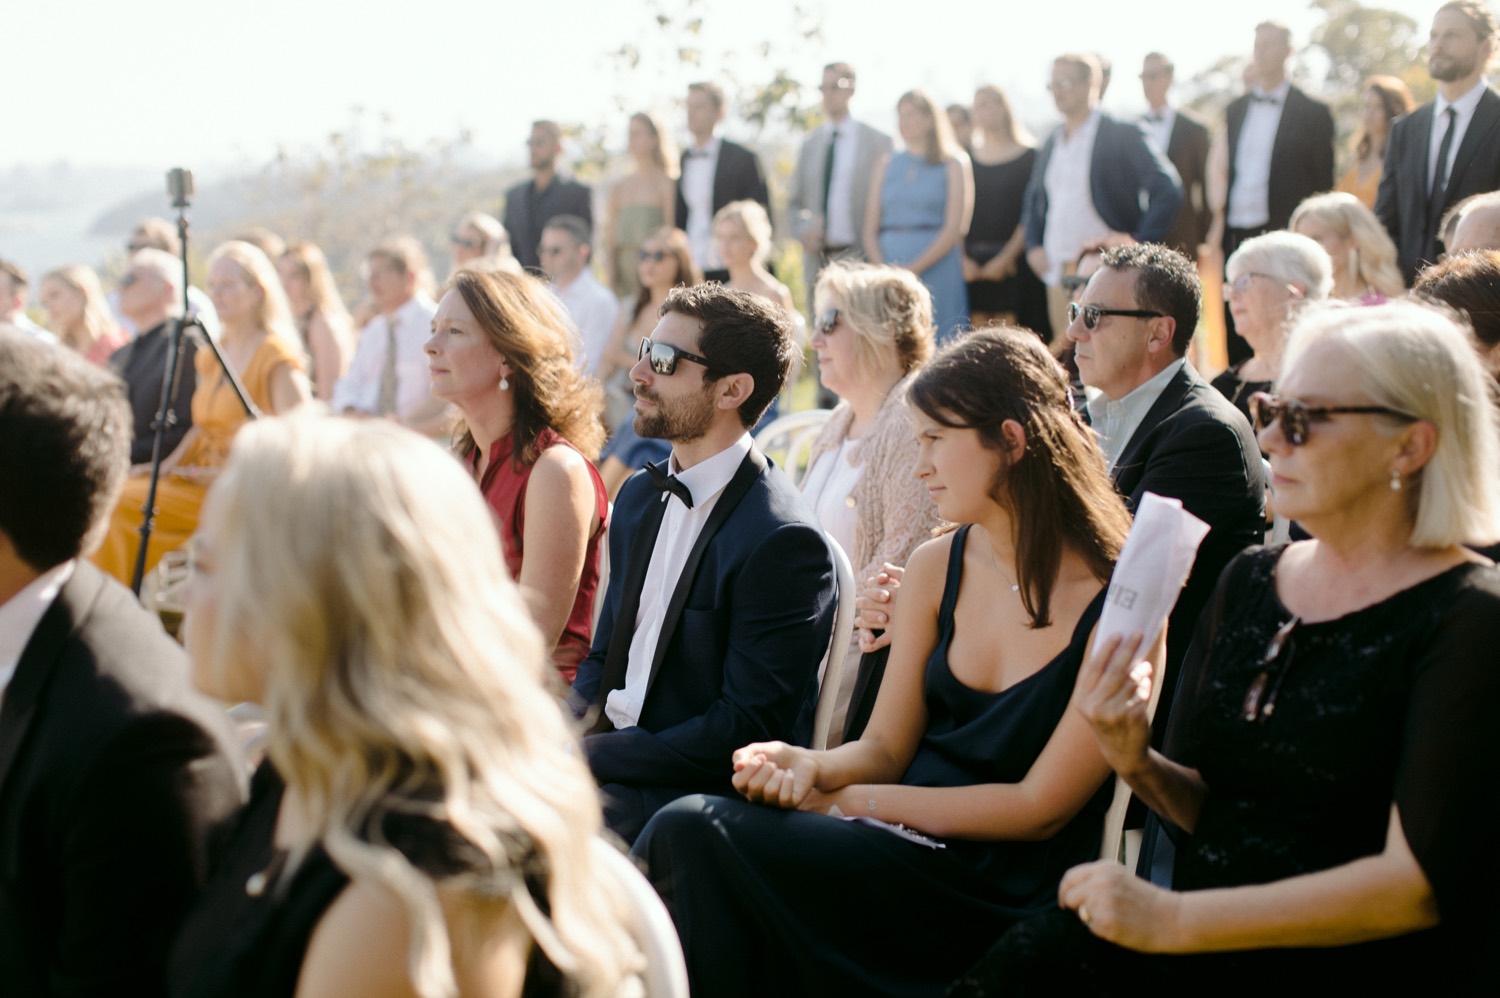 seated guest enjoying ceremony